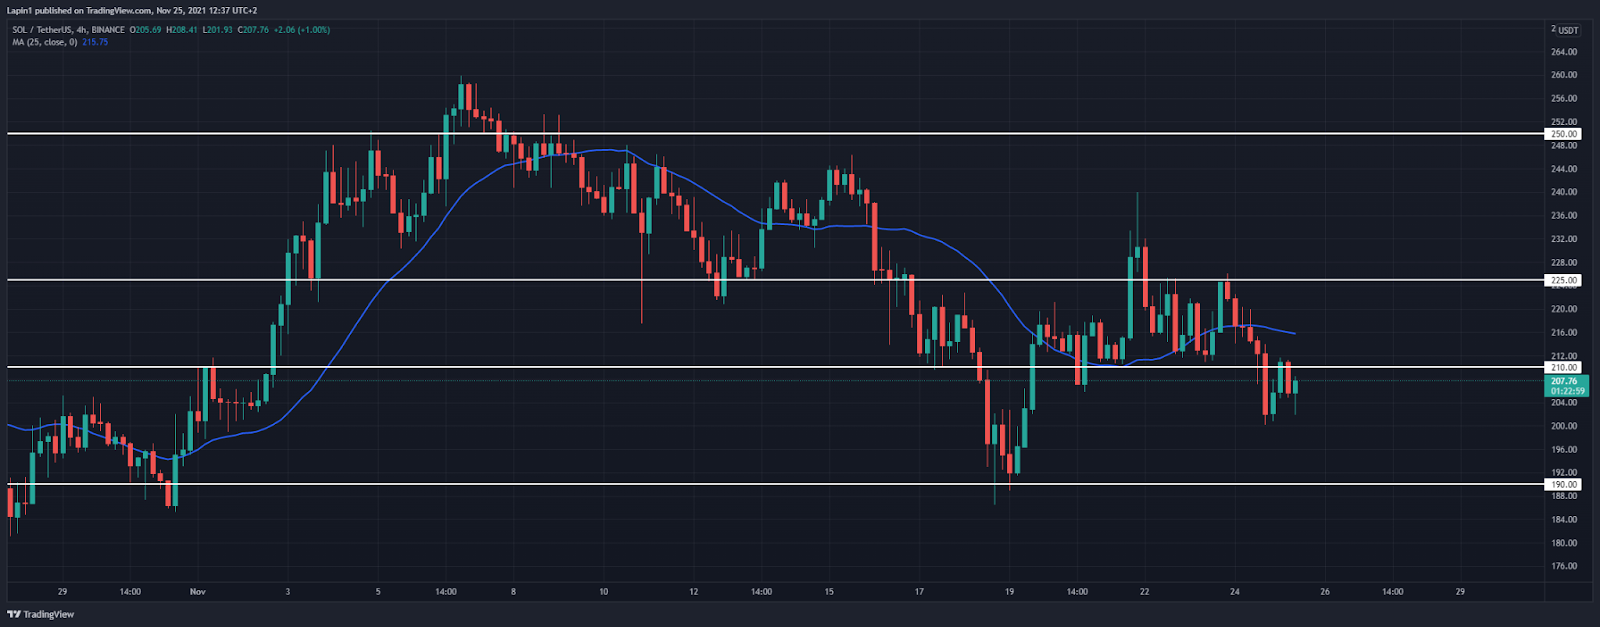 Solana Price Analysis: SOL retests $210 before another drop?